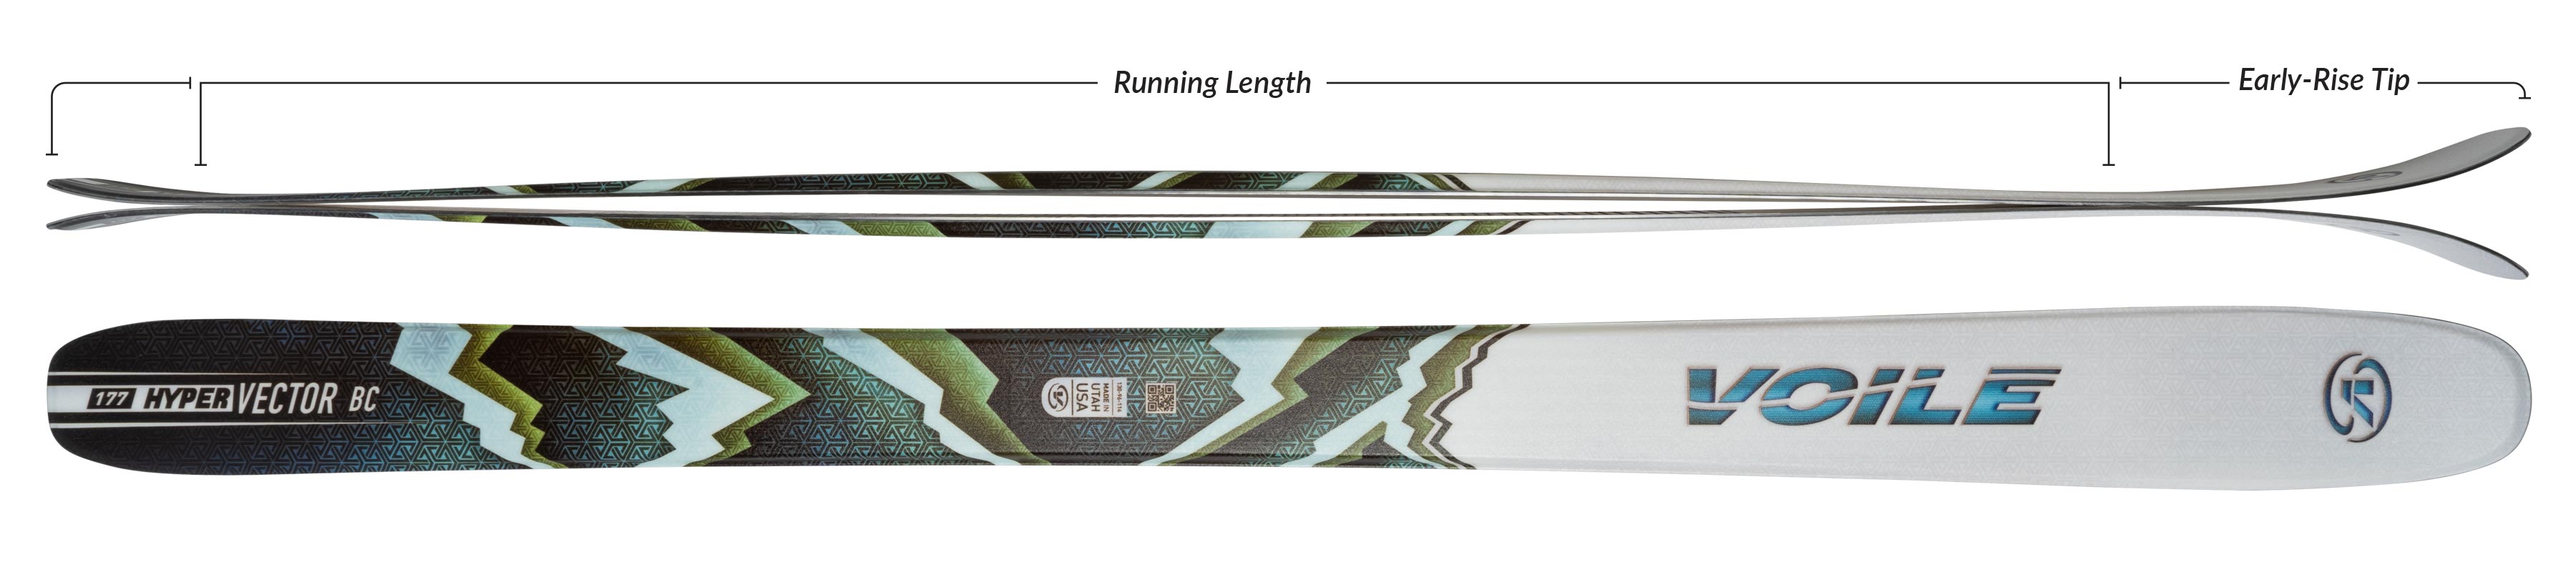 Voile HyperVector BC Skis Camber Profile